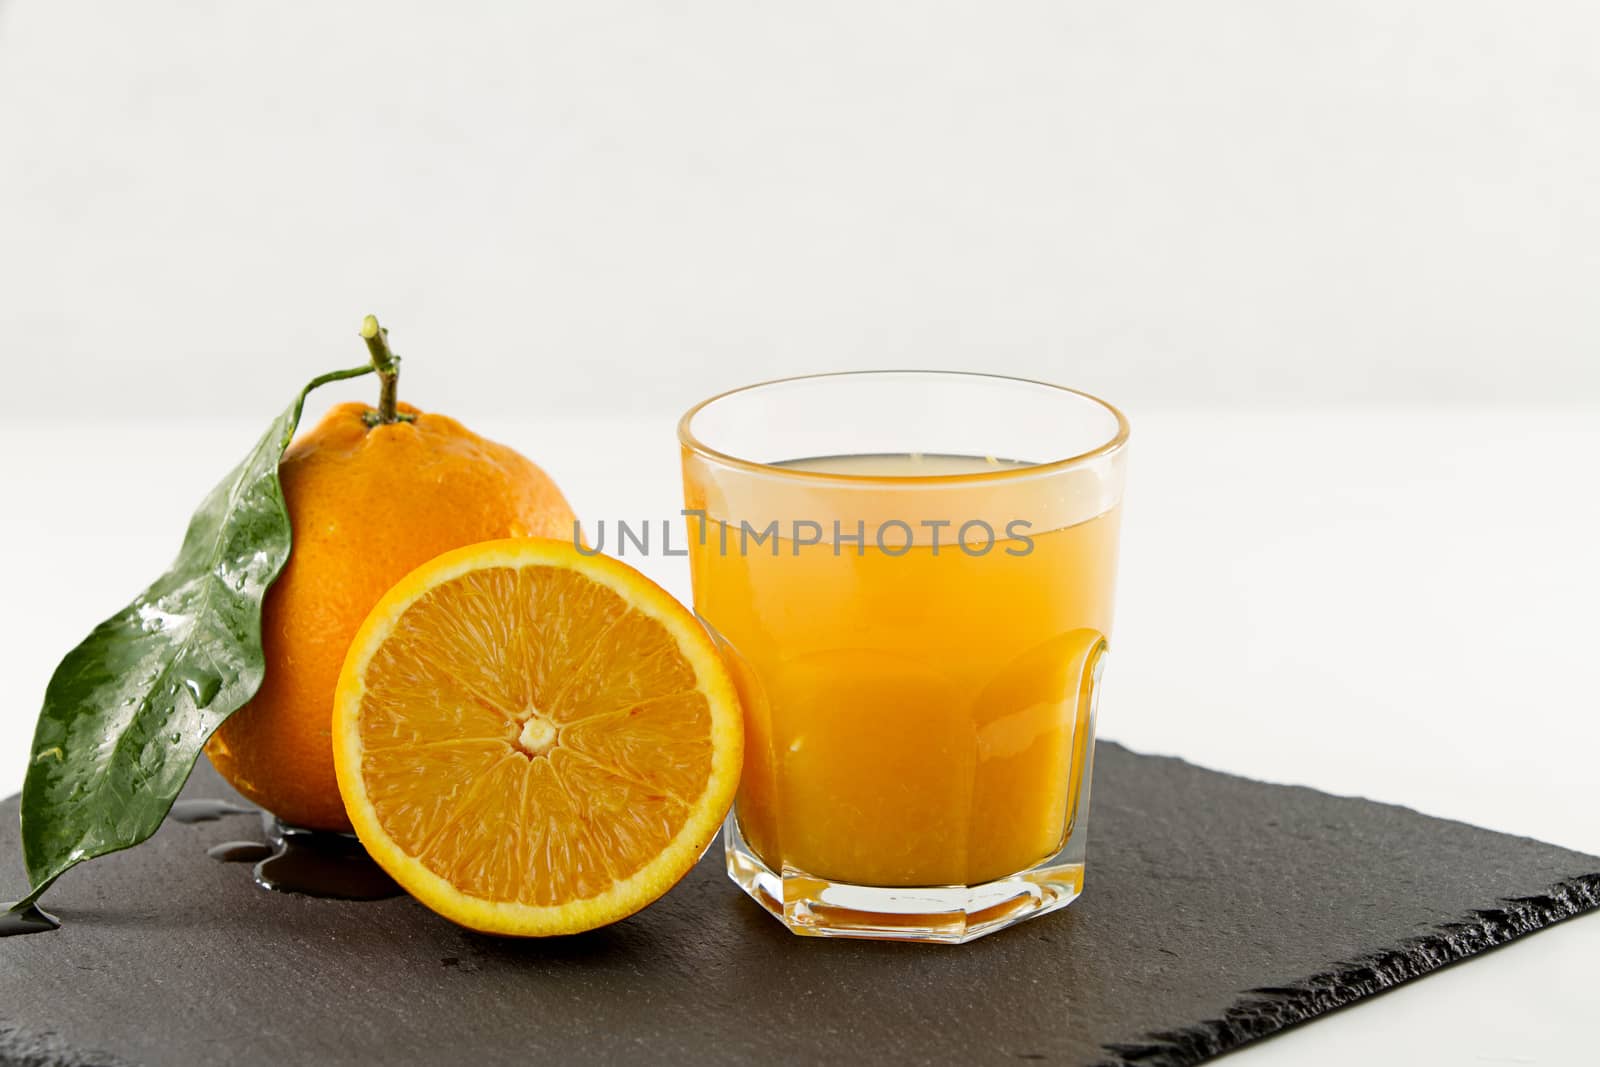 An inviting glass full of orange juice, a half orange and a whol by robbyfontanesi